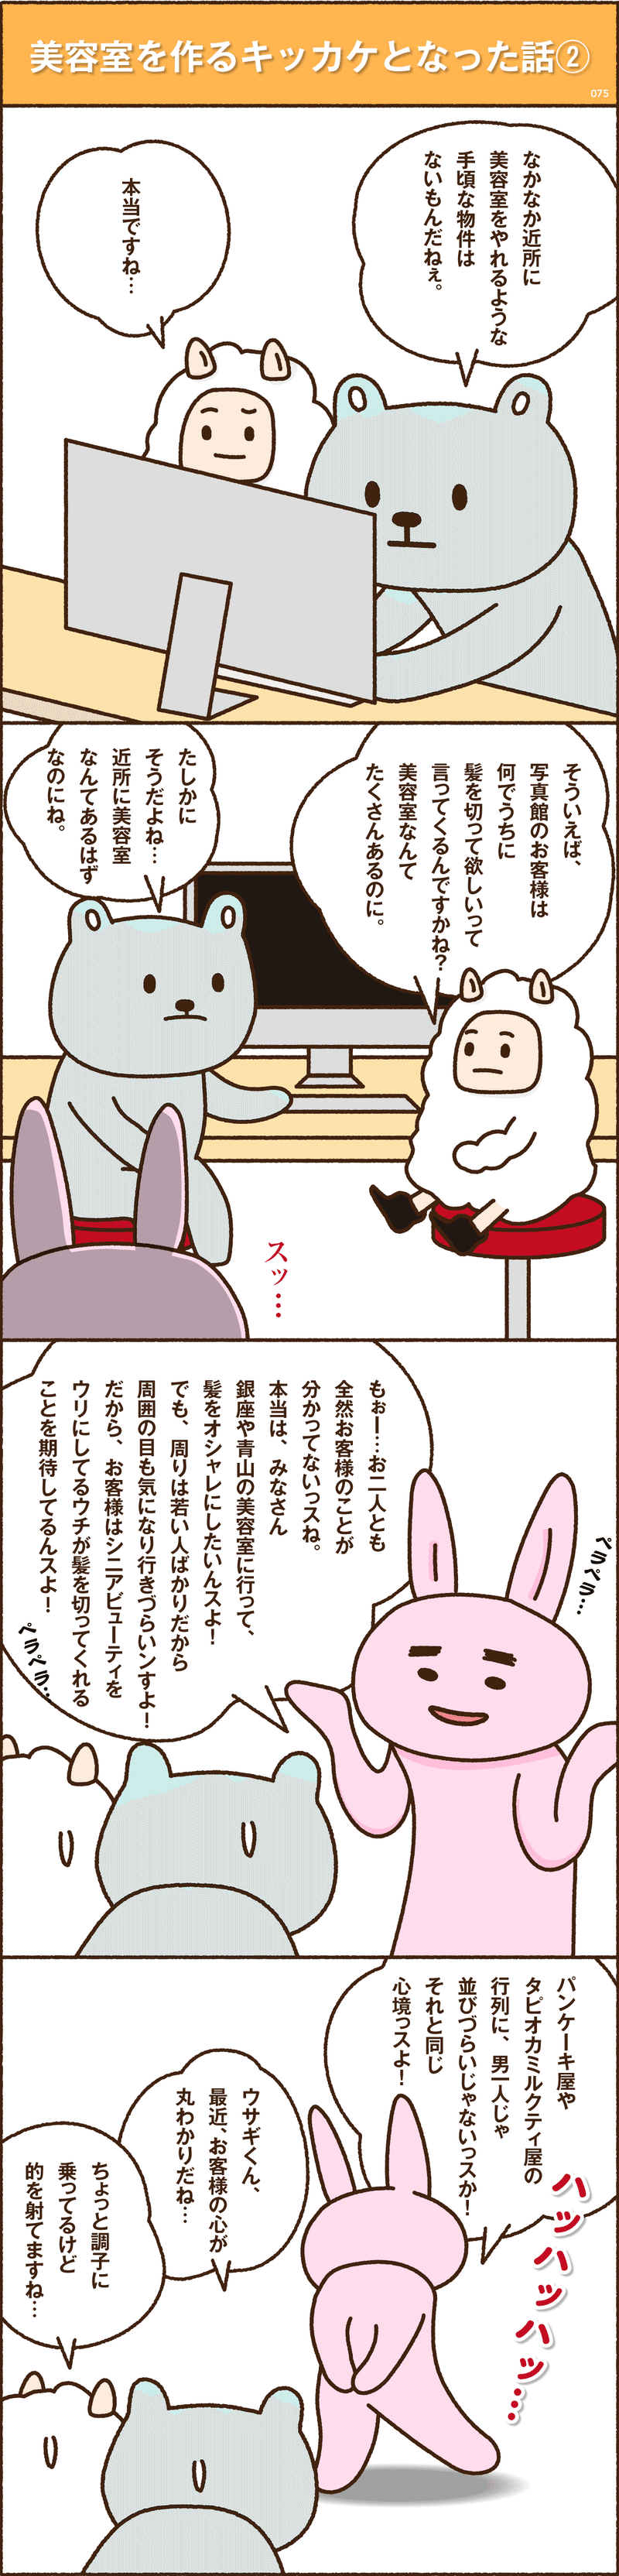 note漫画_3部_w3-4_#75-2_アートボード 1